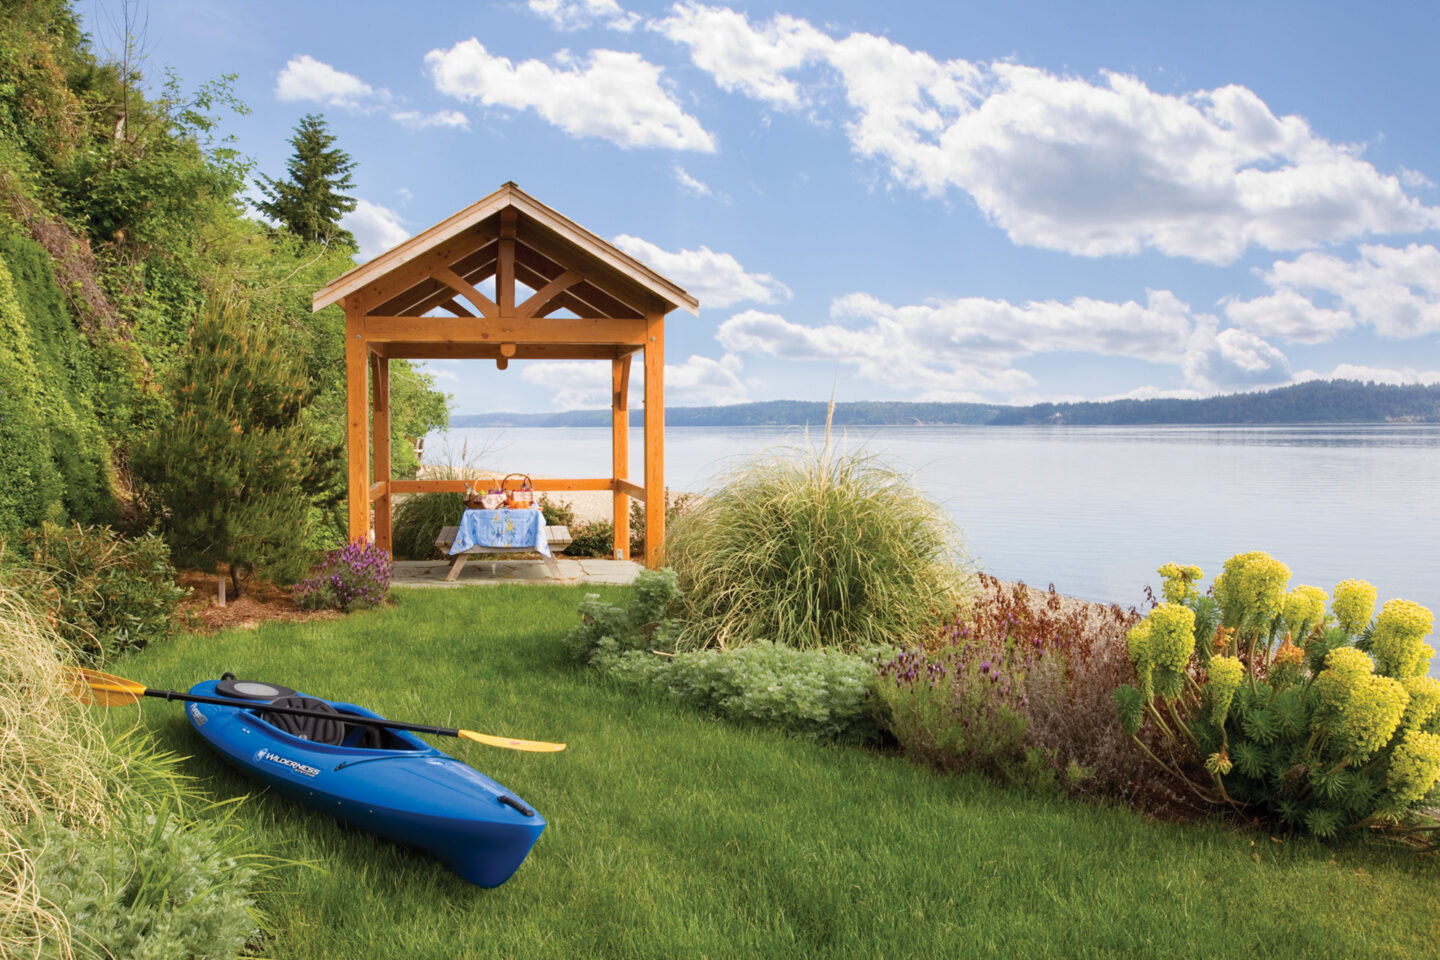 beach shelter with kayak and picnic setting on Puget Sound